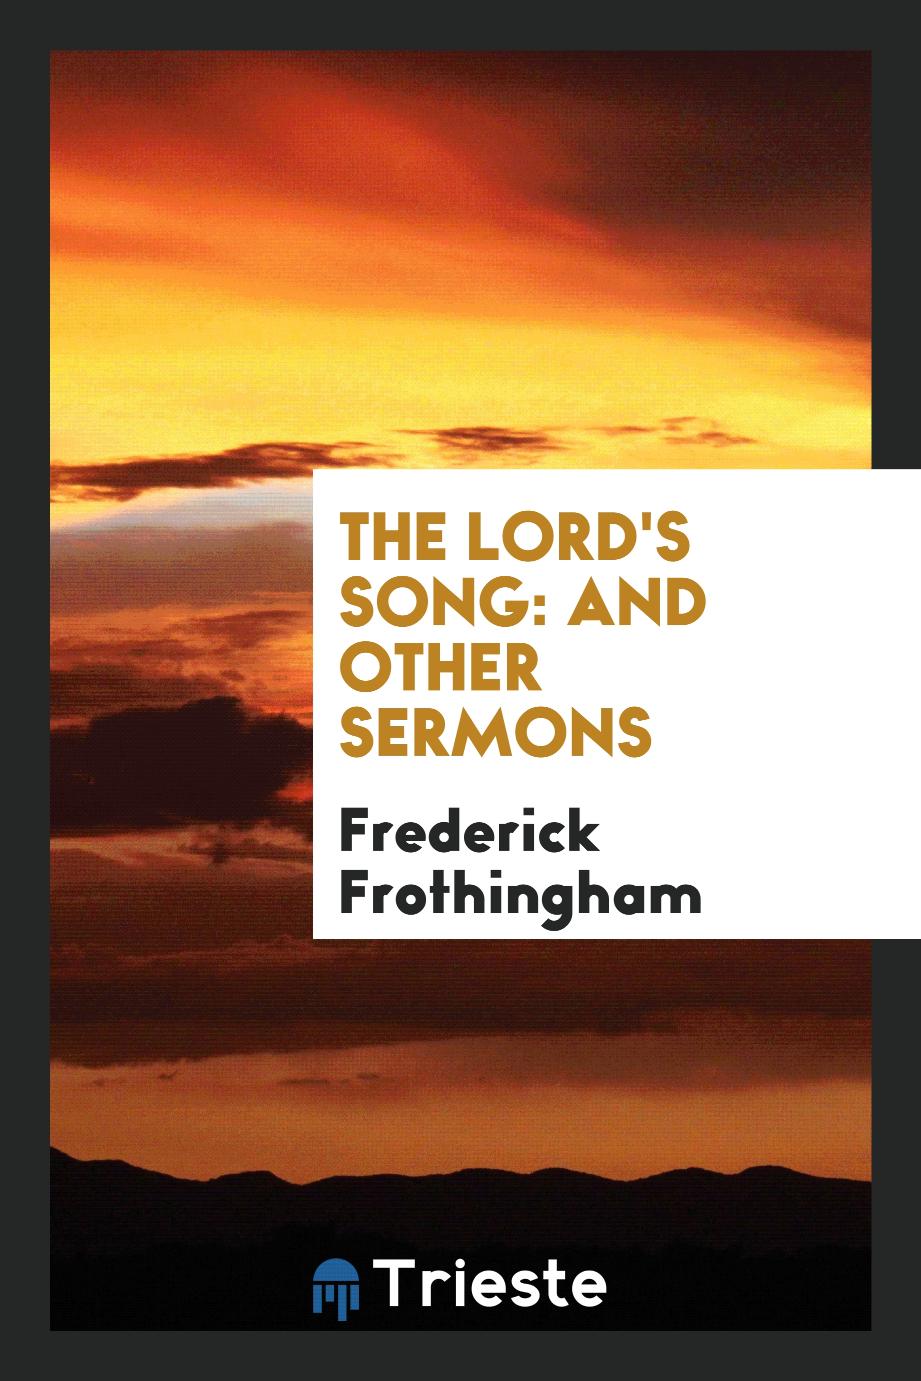 The Lord's Song: And Other Sermons